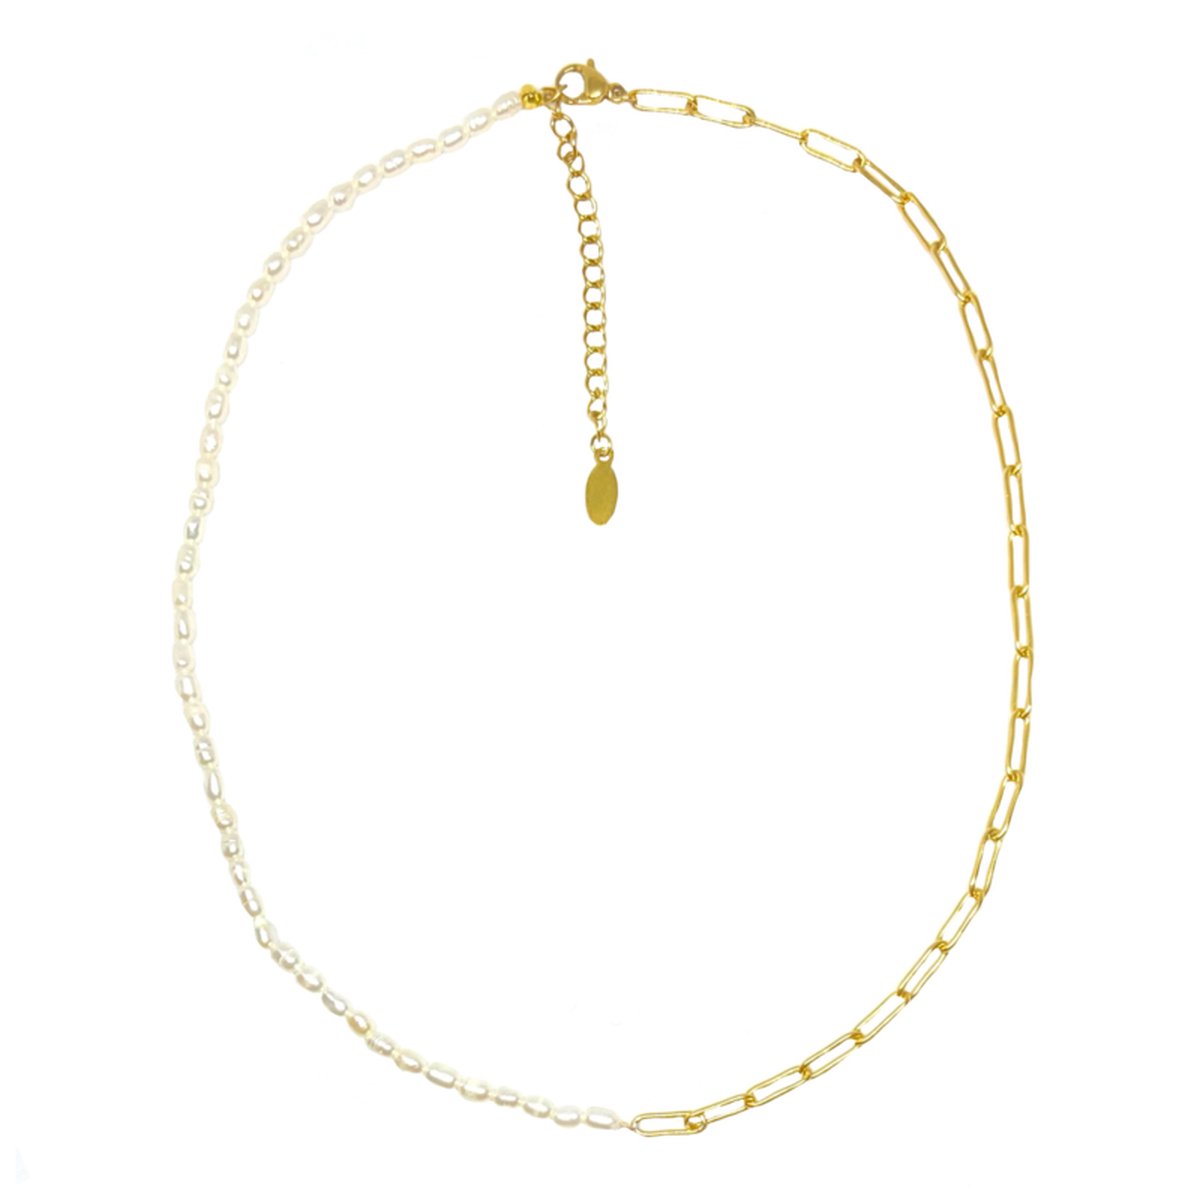 Pearls & chain necklace - gold